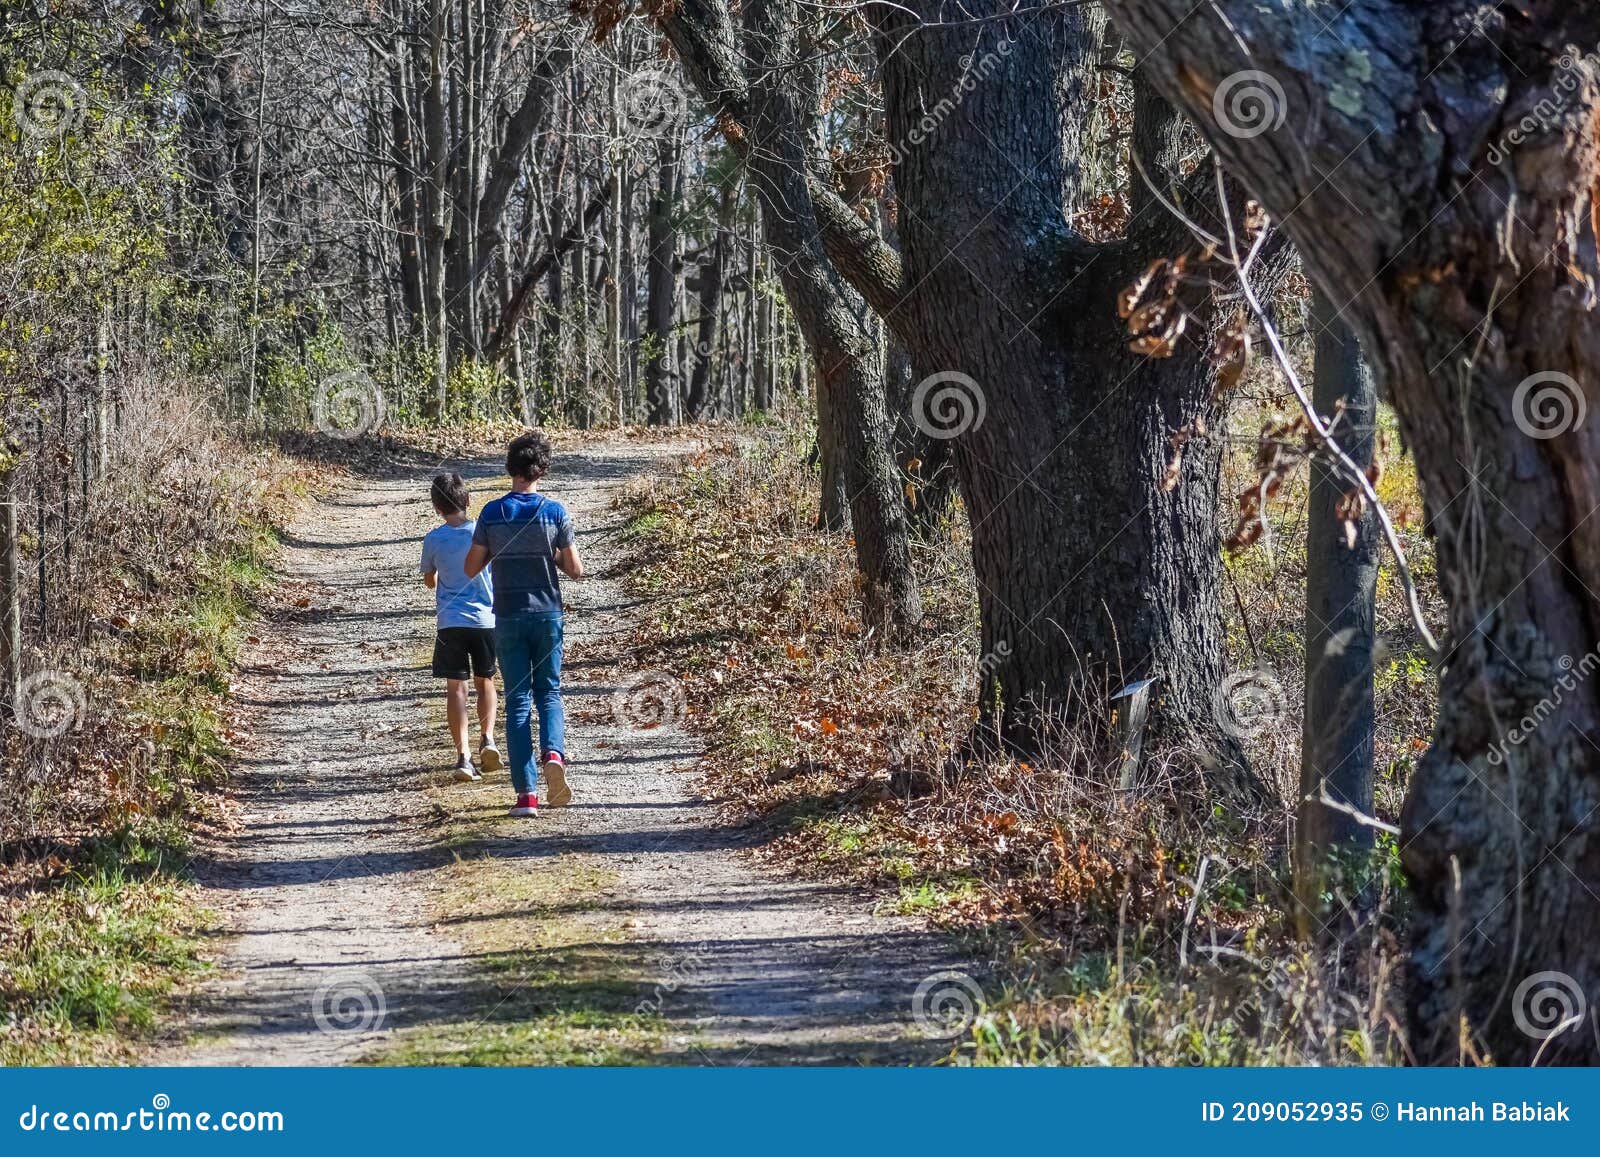 two boys walking on a path in woods